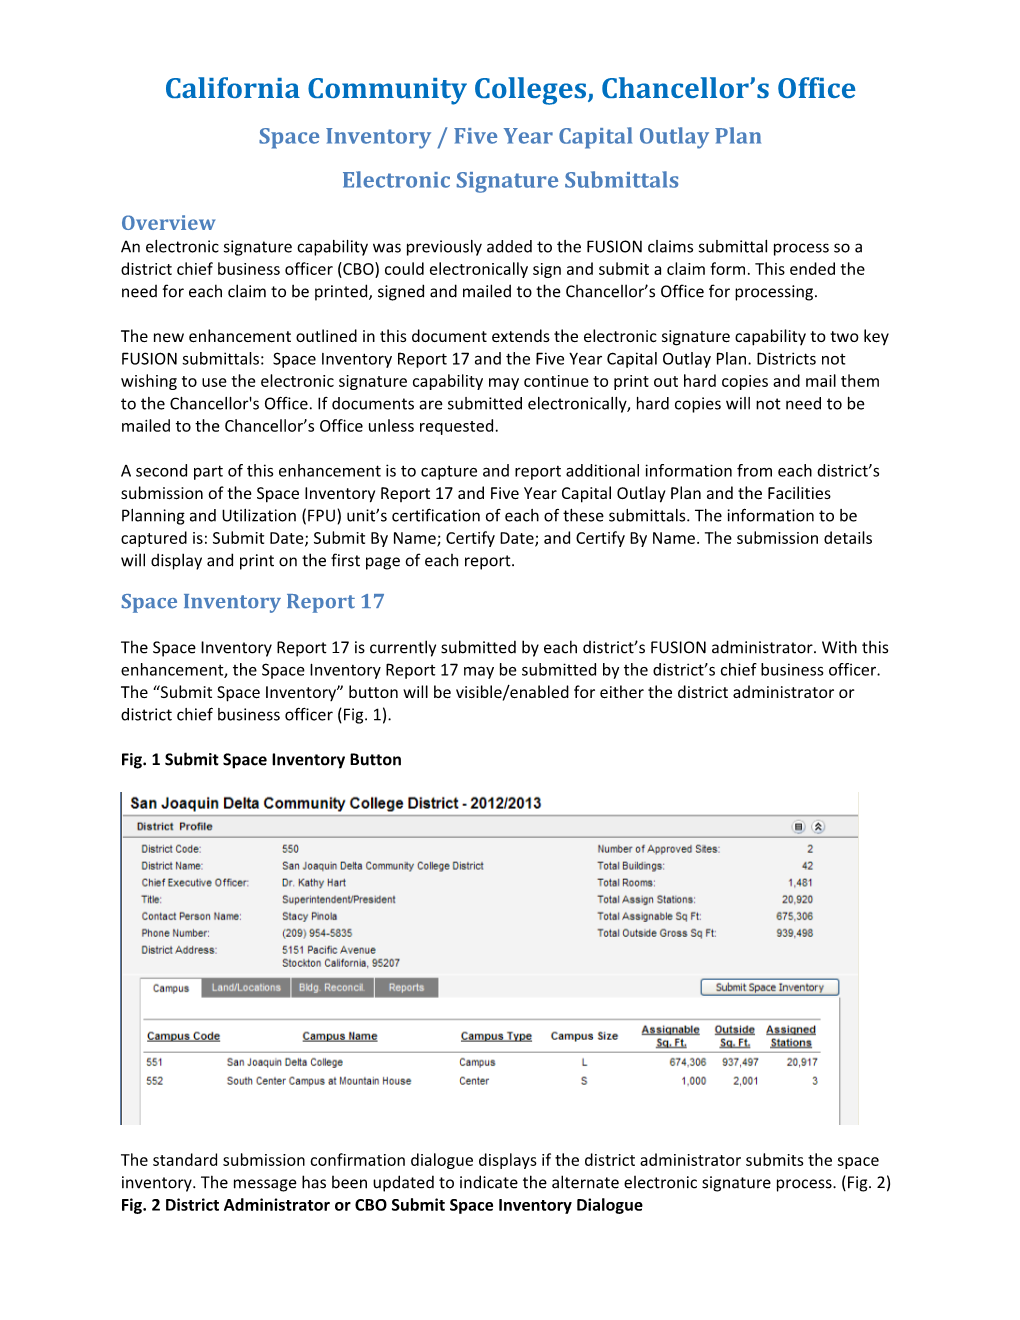 Space Inventory / Five Year Capital Outlay Plan Electronic Signature Submittals